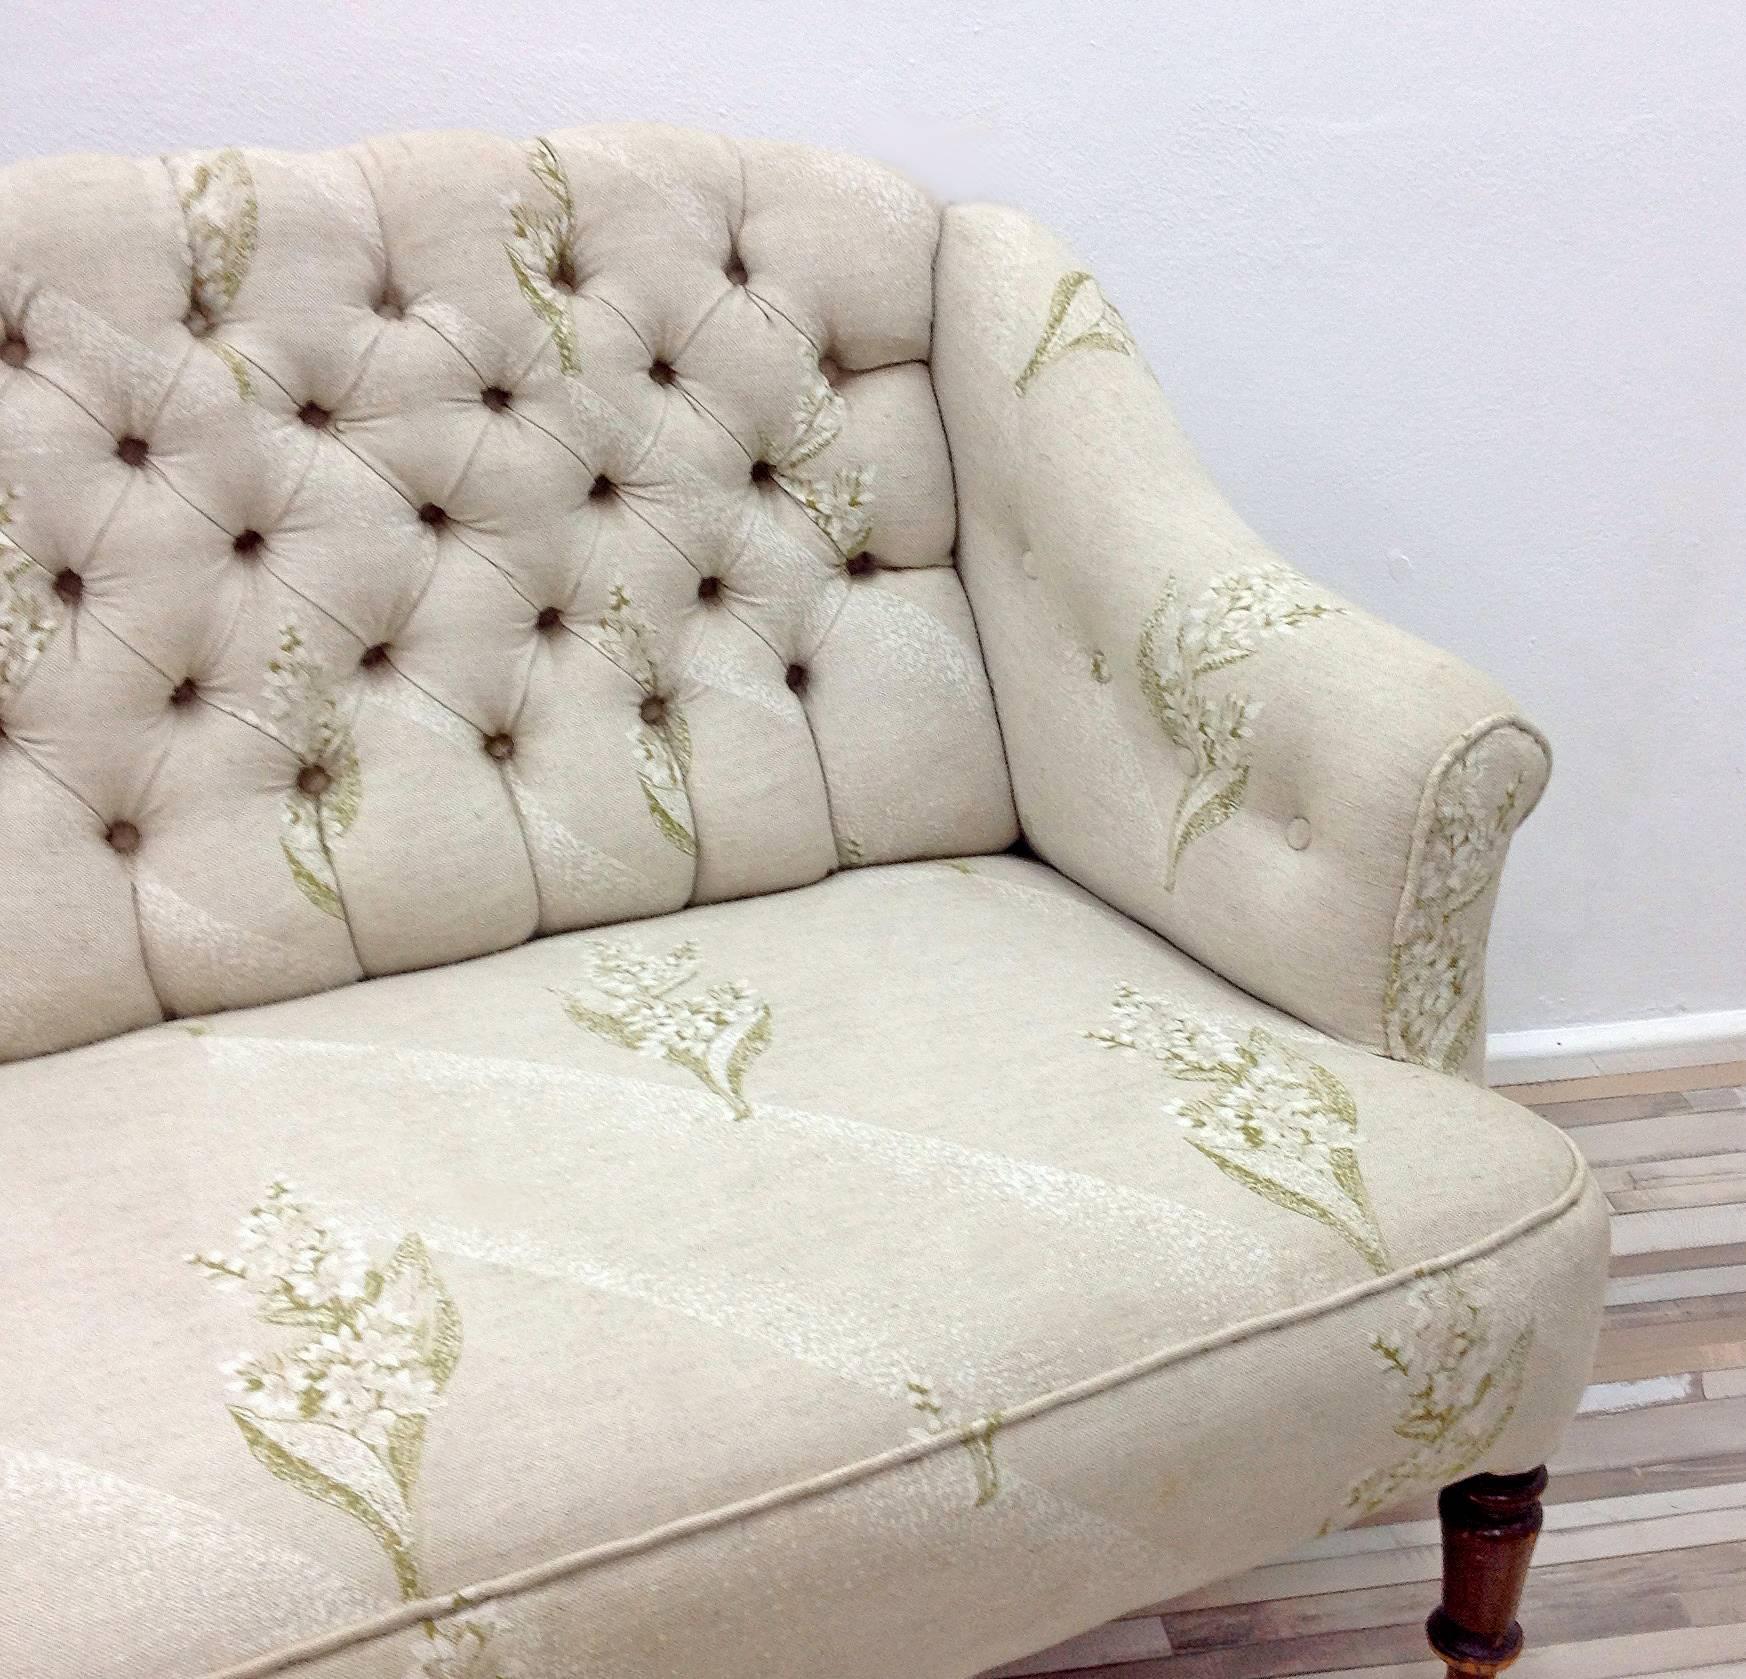 This small sofa originates from the 1940s. It features a classic quilted backrest and new linen upholstery. The front legs are finished with brass rings. Ringhs are a high-quality new Italian production stylized for the 40 years. The sofa has been